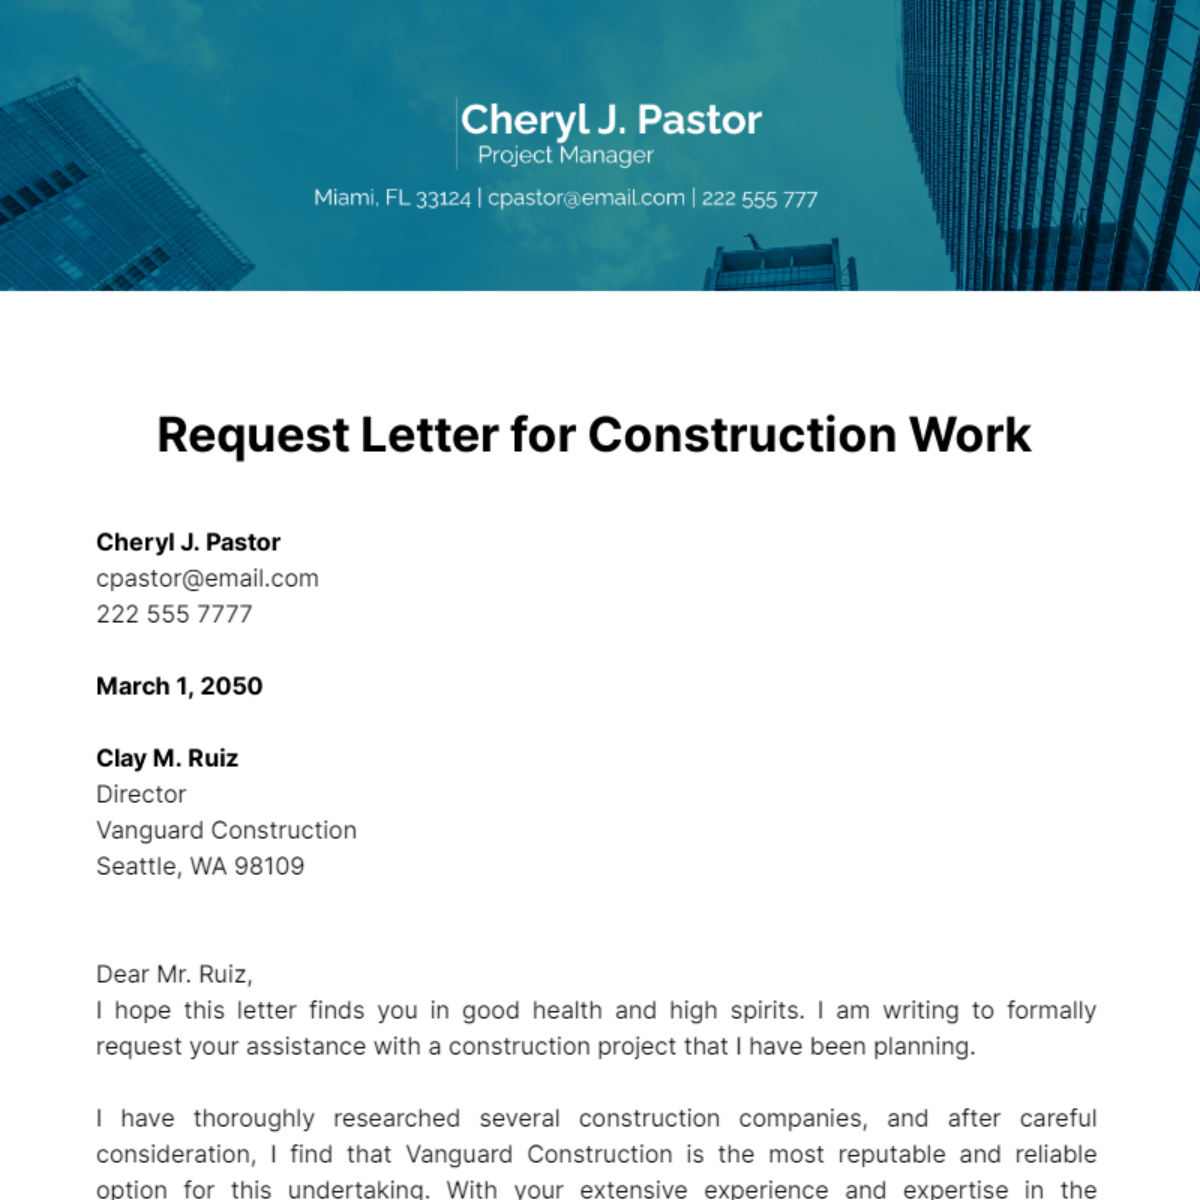 Request Letter for Construction Work  Template